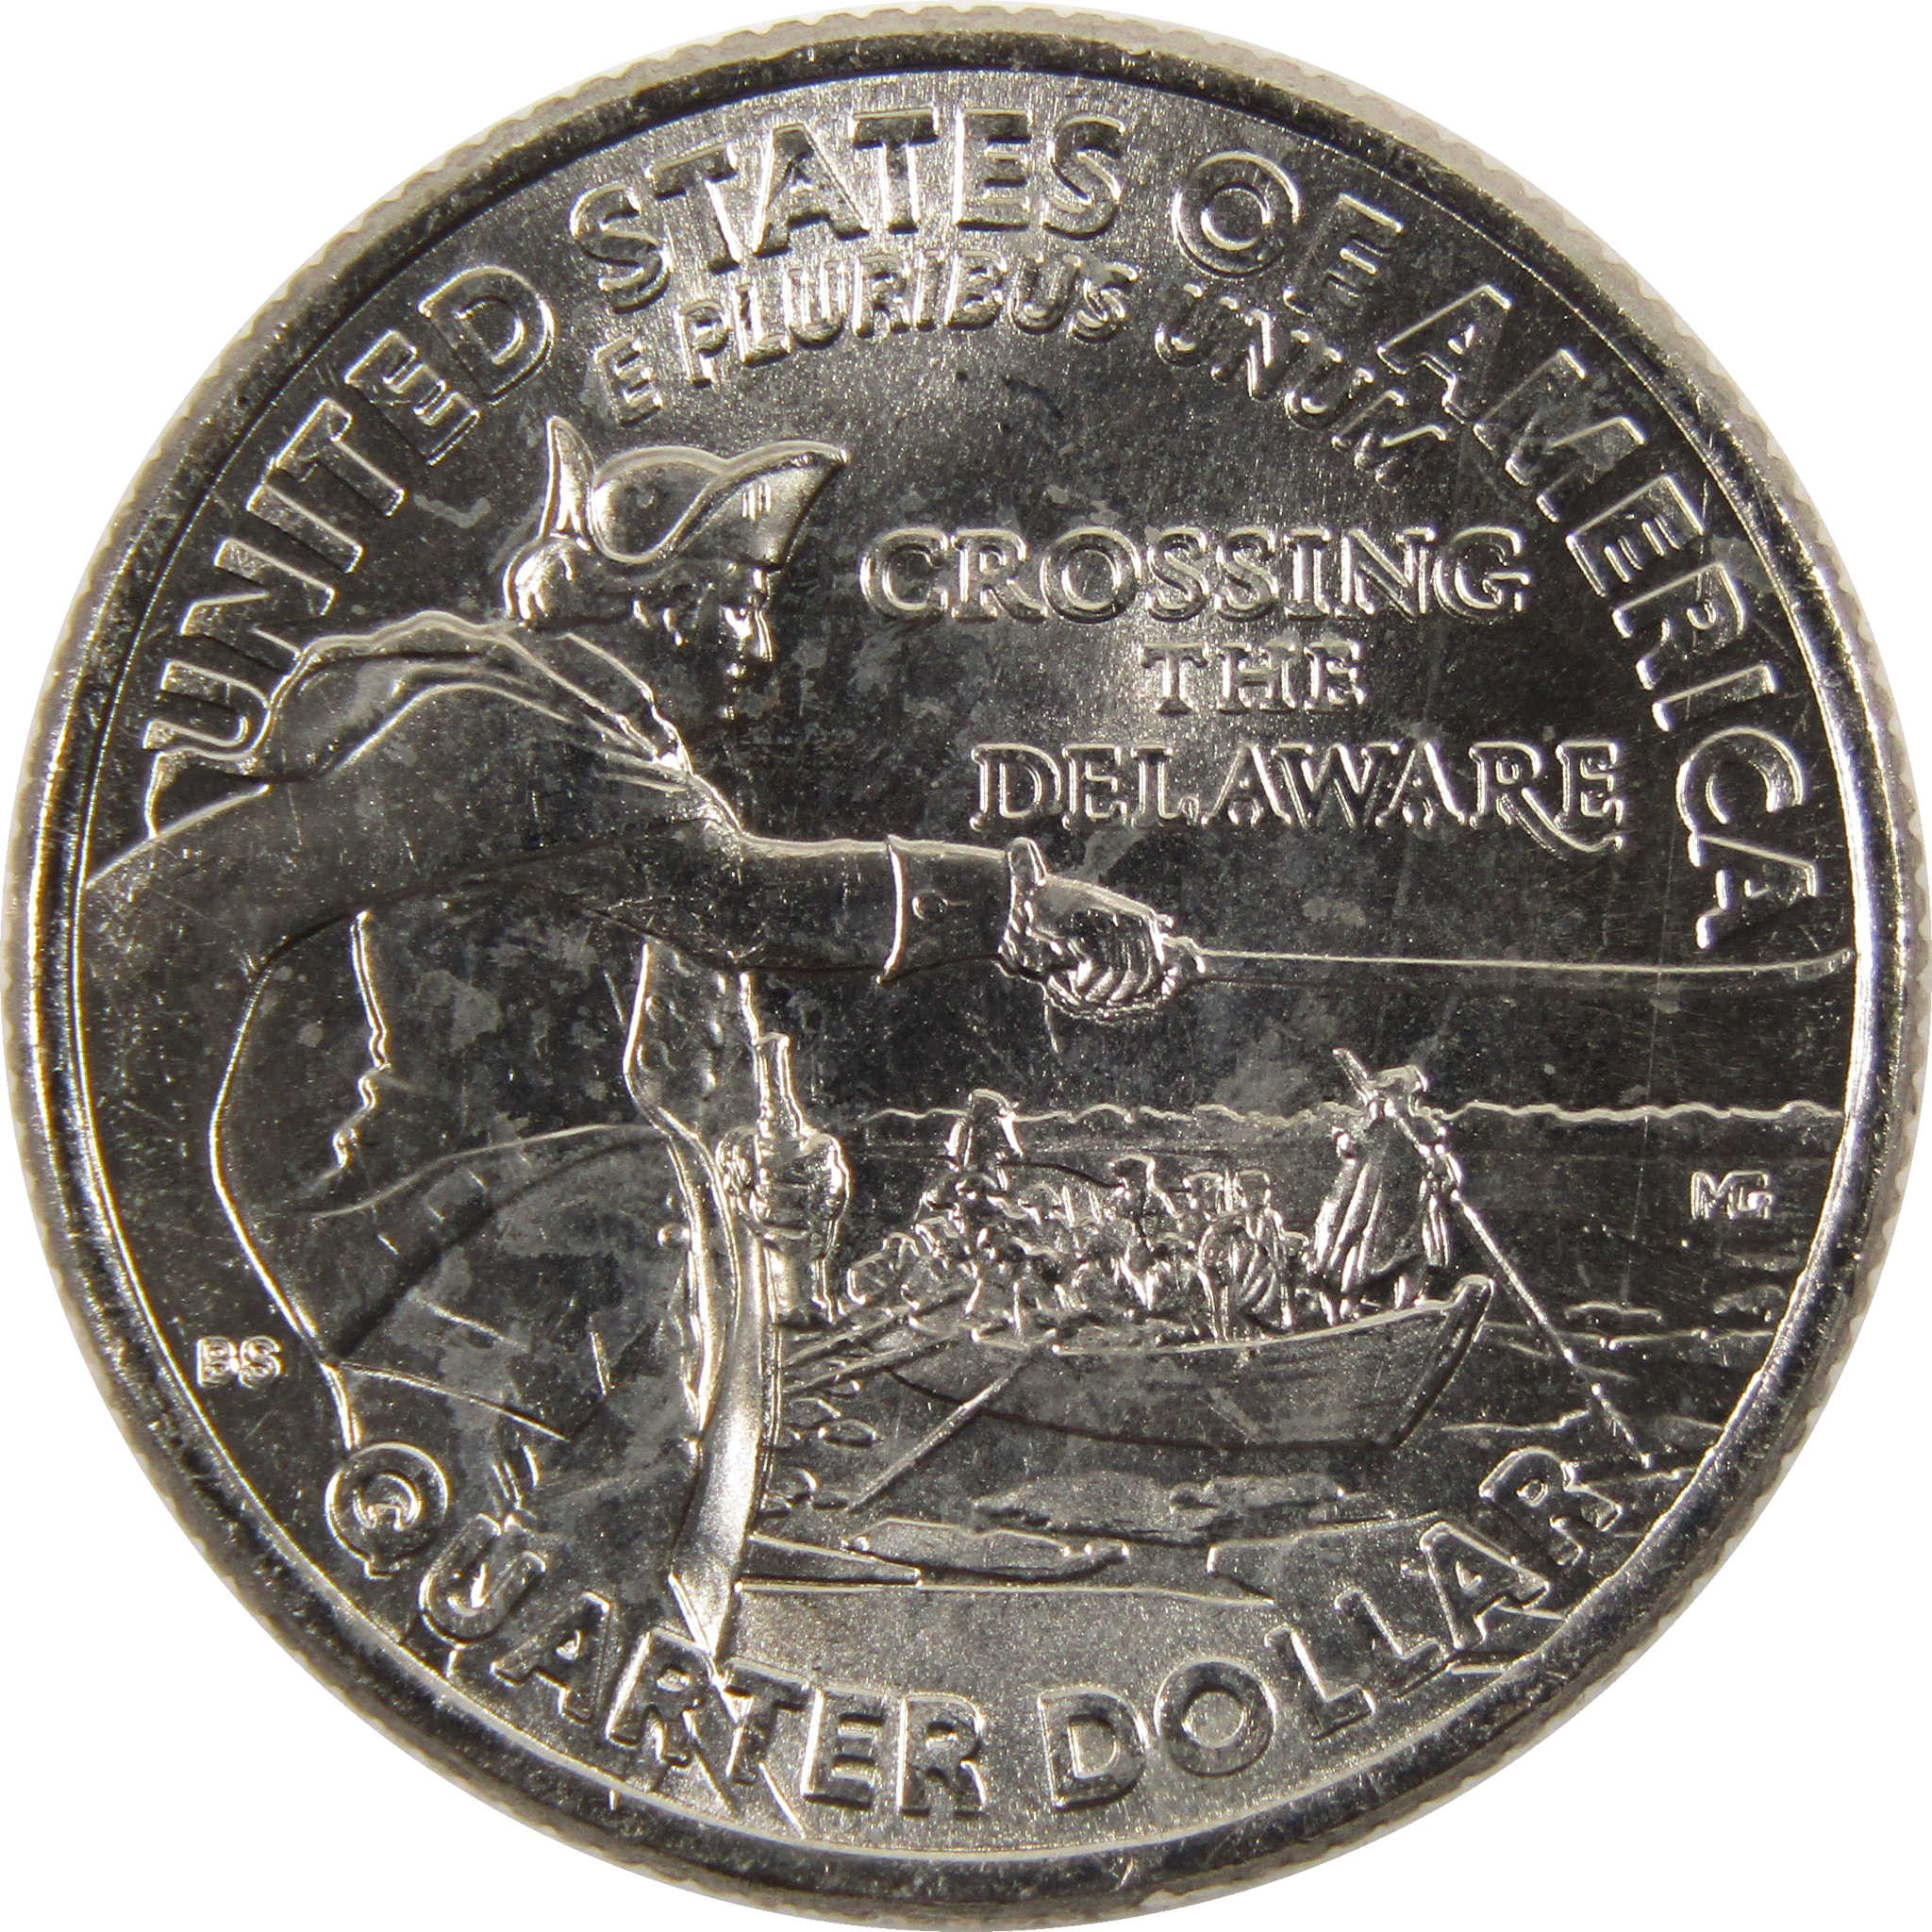 2021 P Washington Crossing the Delaware Quarter Uncirculated Clad Coin